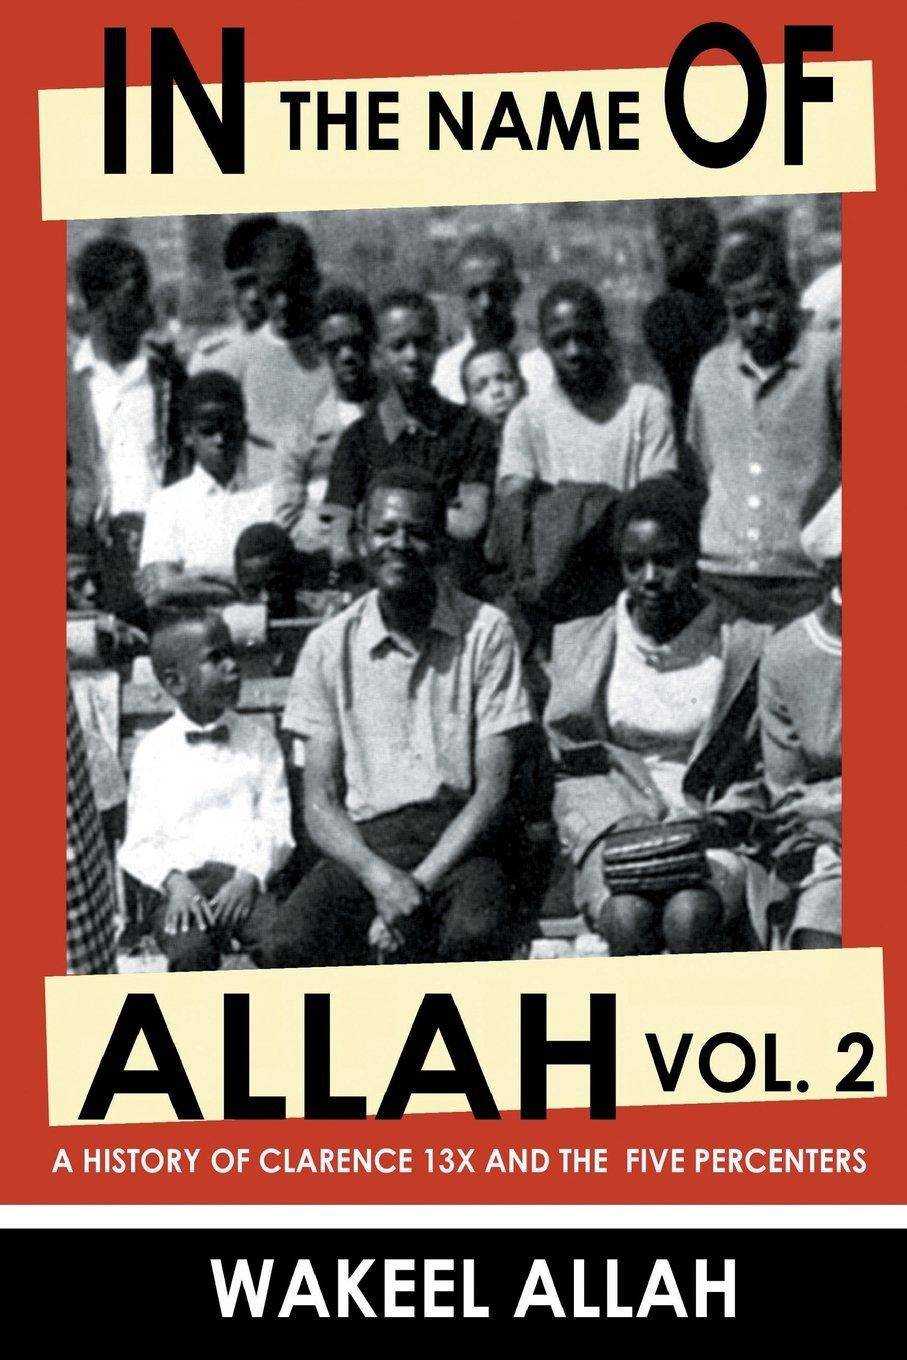 In the Name of Allah, Vol. 2: A History of Clarence 13X and the Five Percenters - SureShot Books Publishing LLC